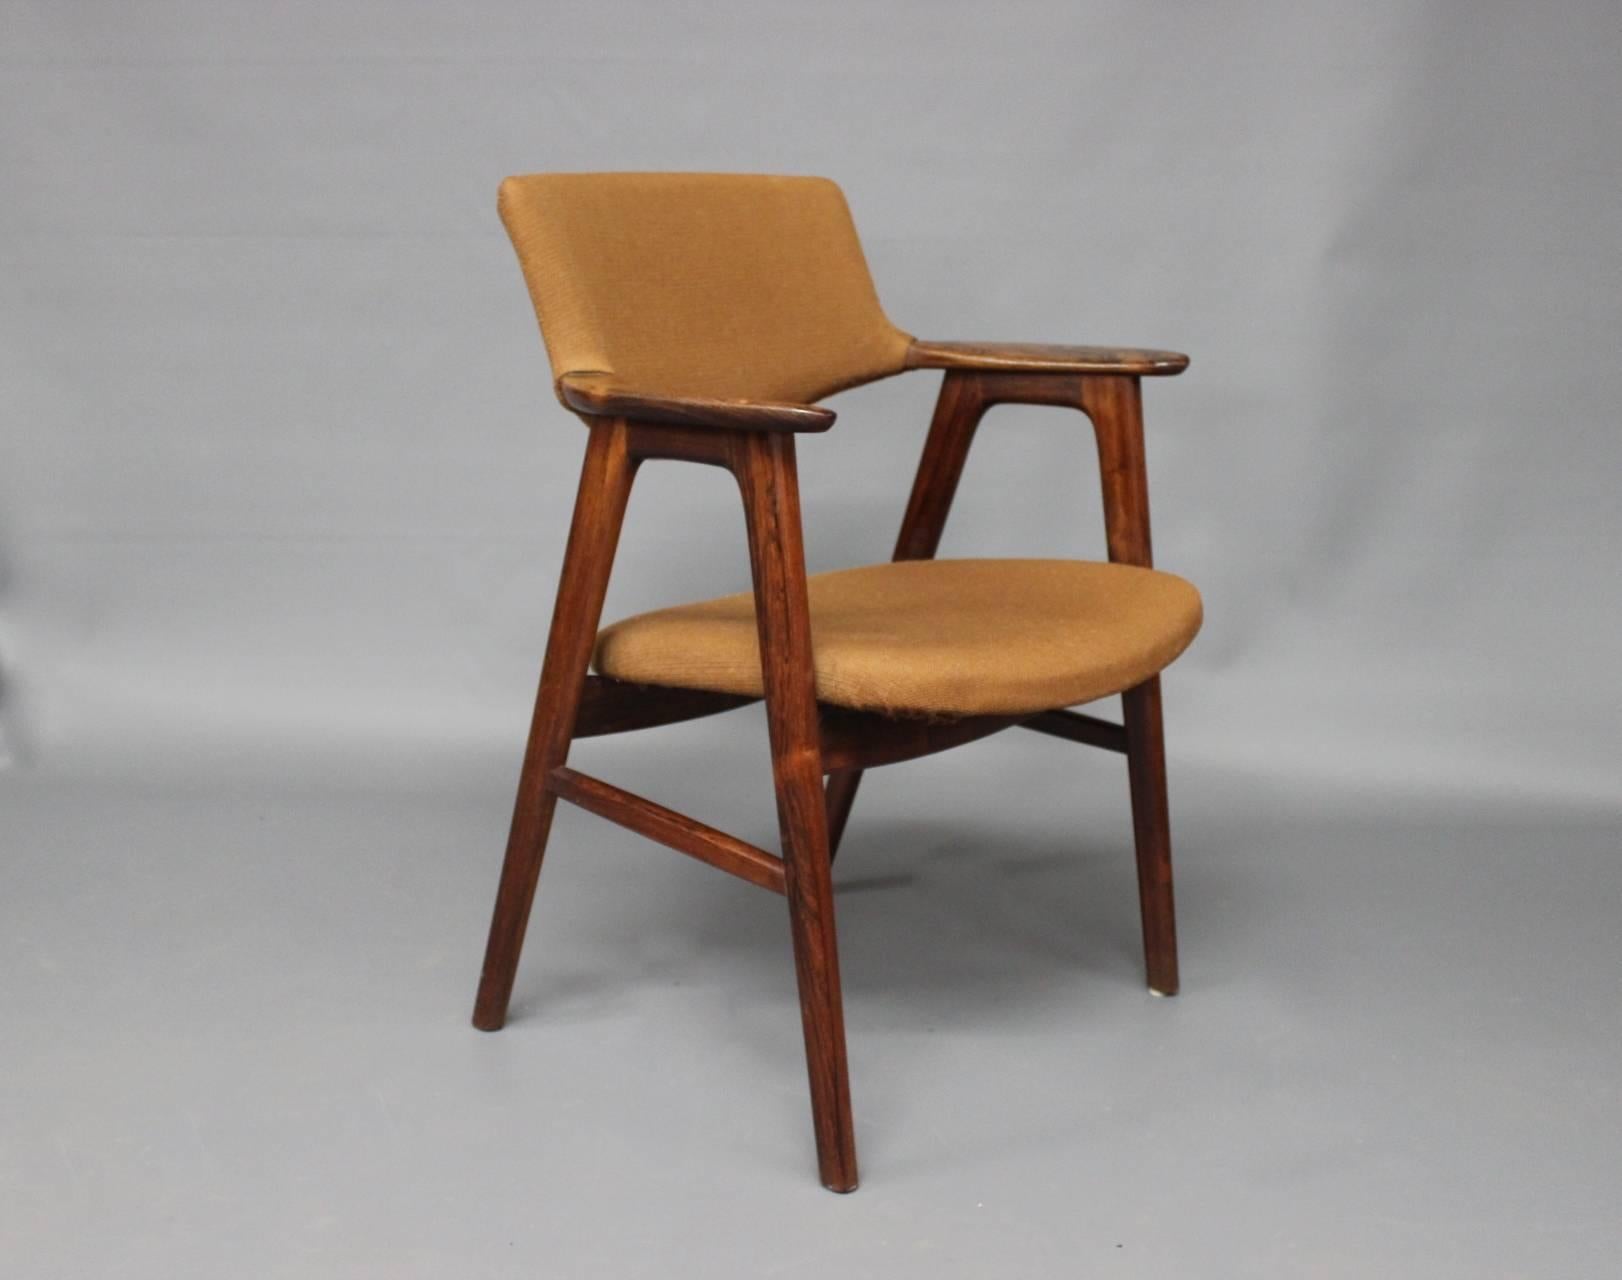 Armchair designed by Erik Kirkegaard and manufactured by Hoeng Furniture Factory in the 1960s. The chairs is of rosewood and upholstered in brown fabric.